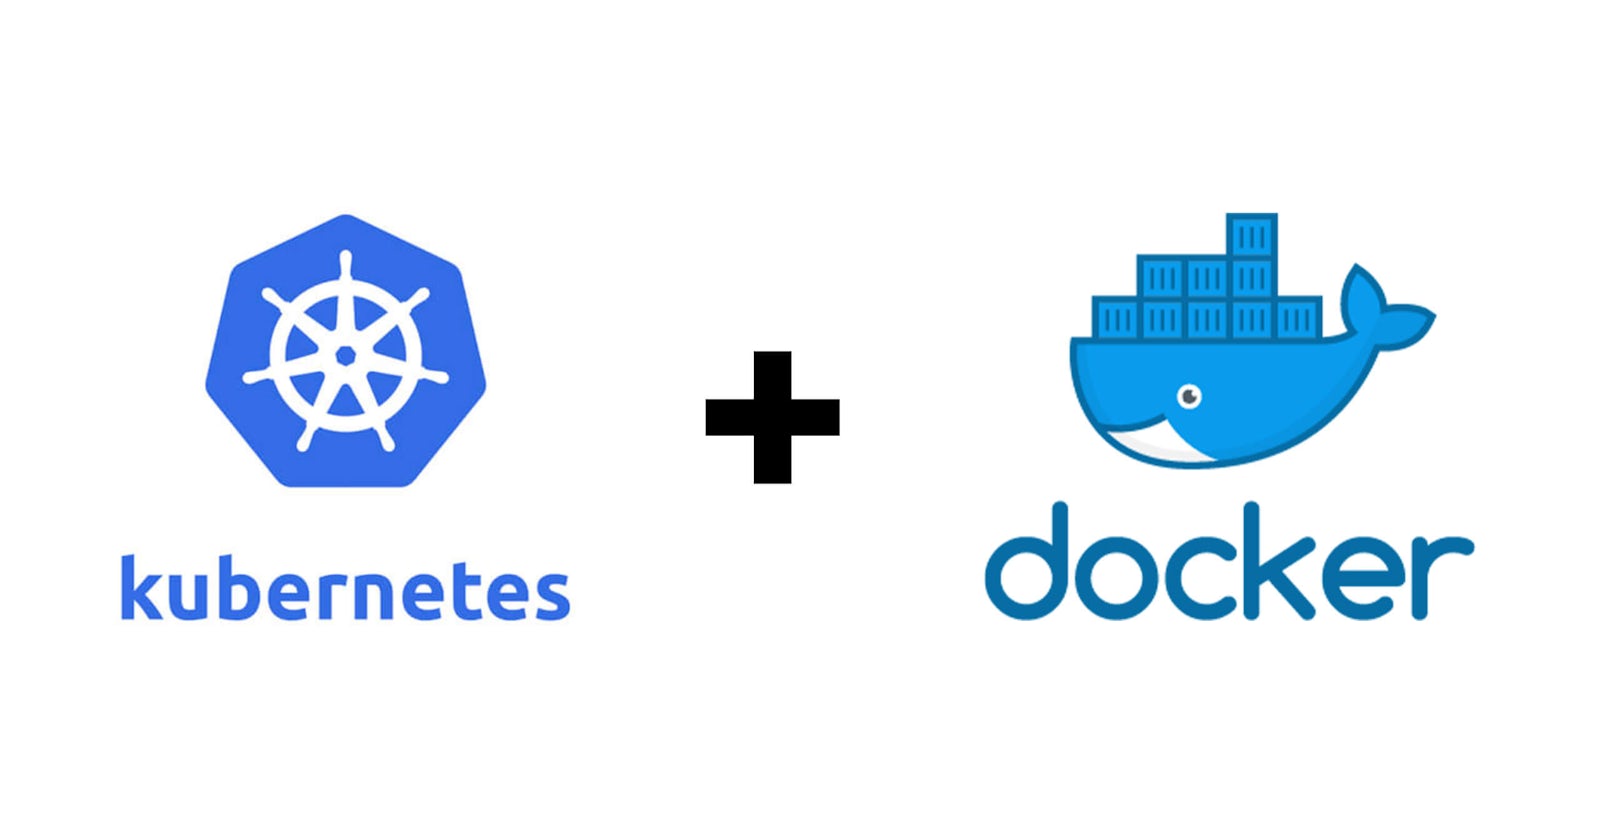 Containerize your web application & deploy it on Kubernetes